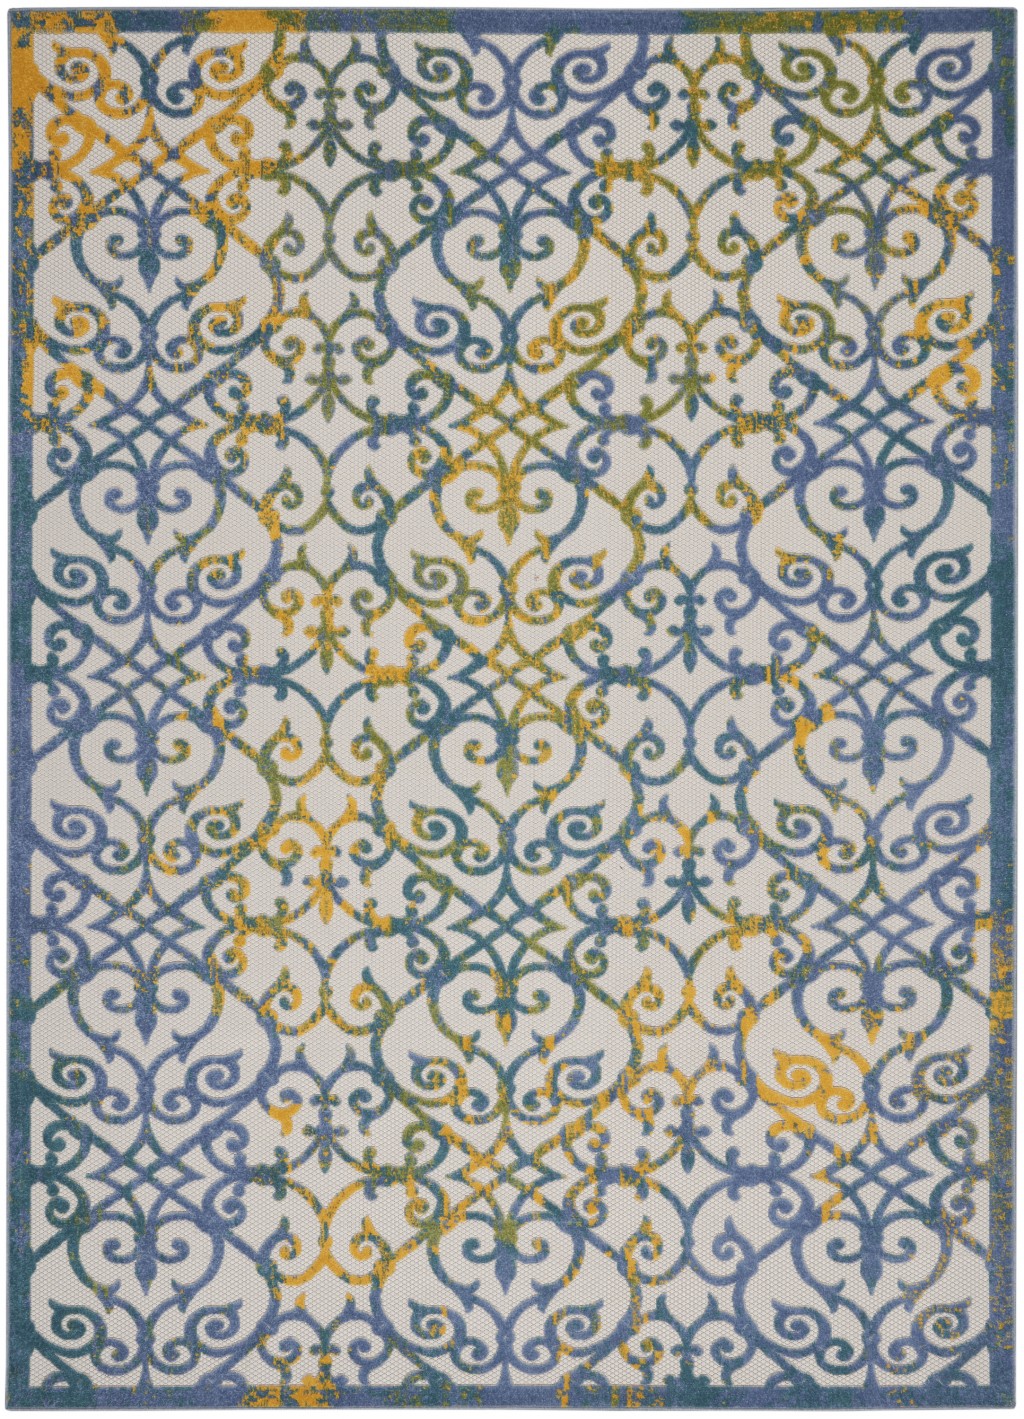 8' X 11' Ivory And Blue Floral Indoor Outdoor Area Rug-385023-1